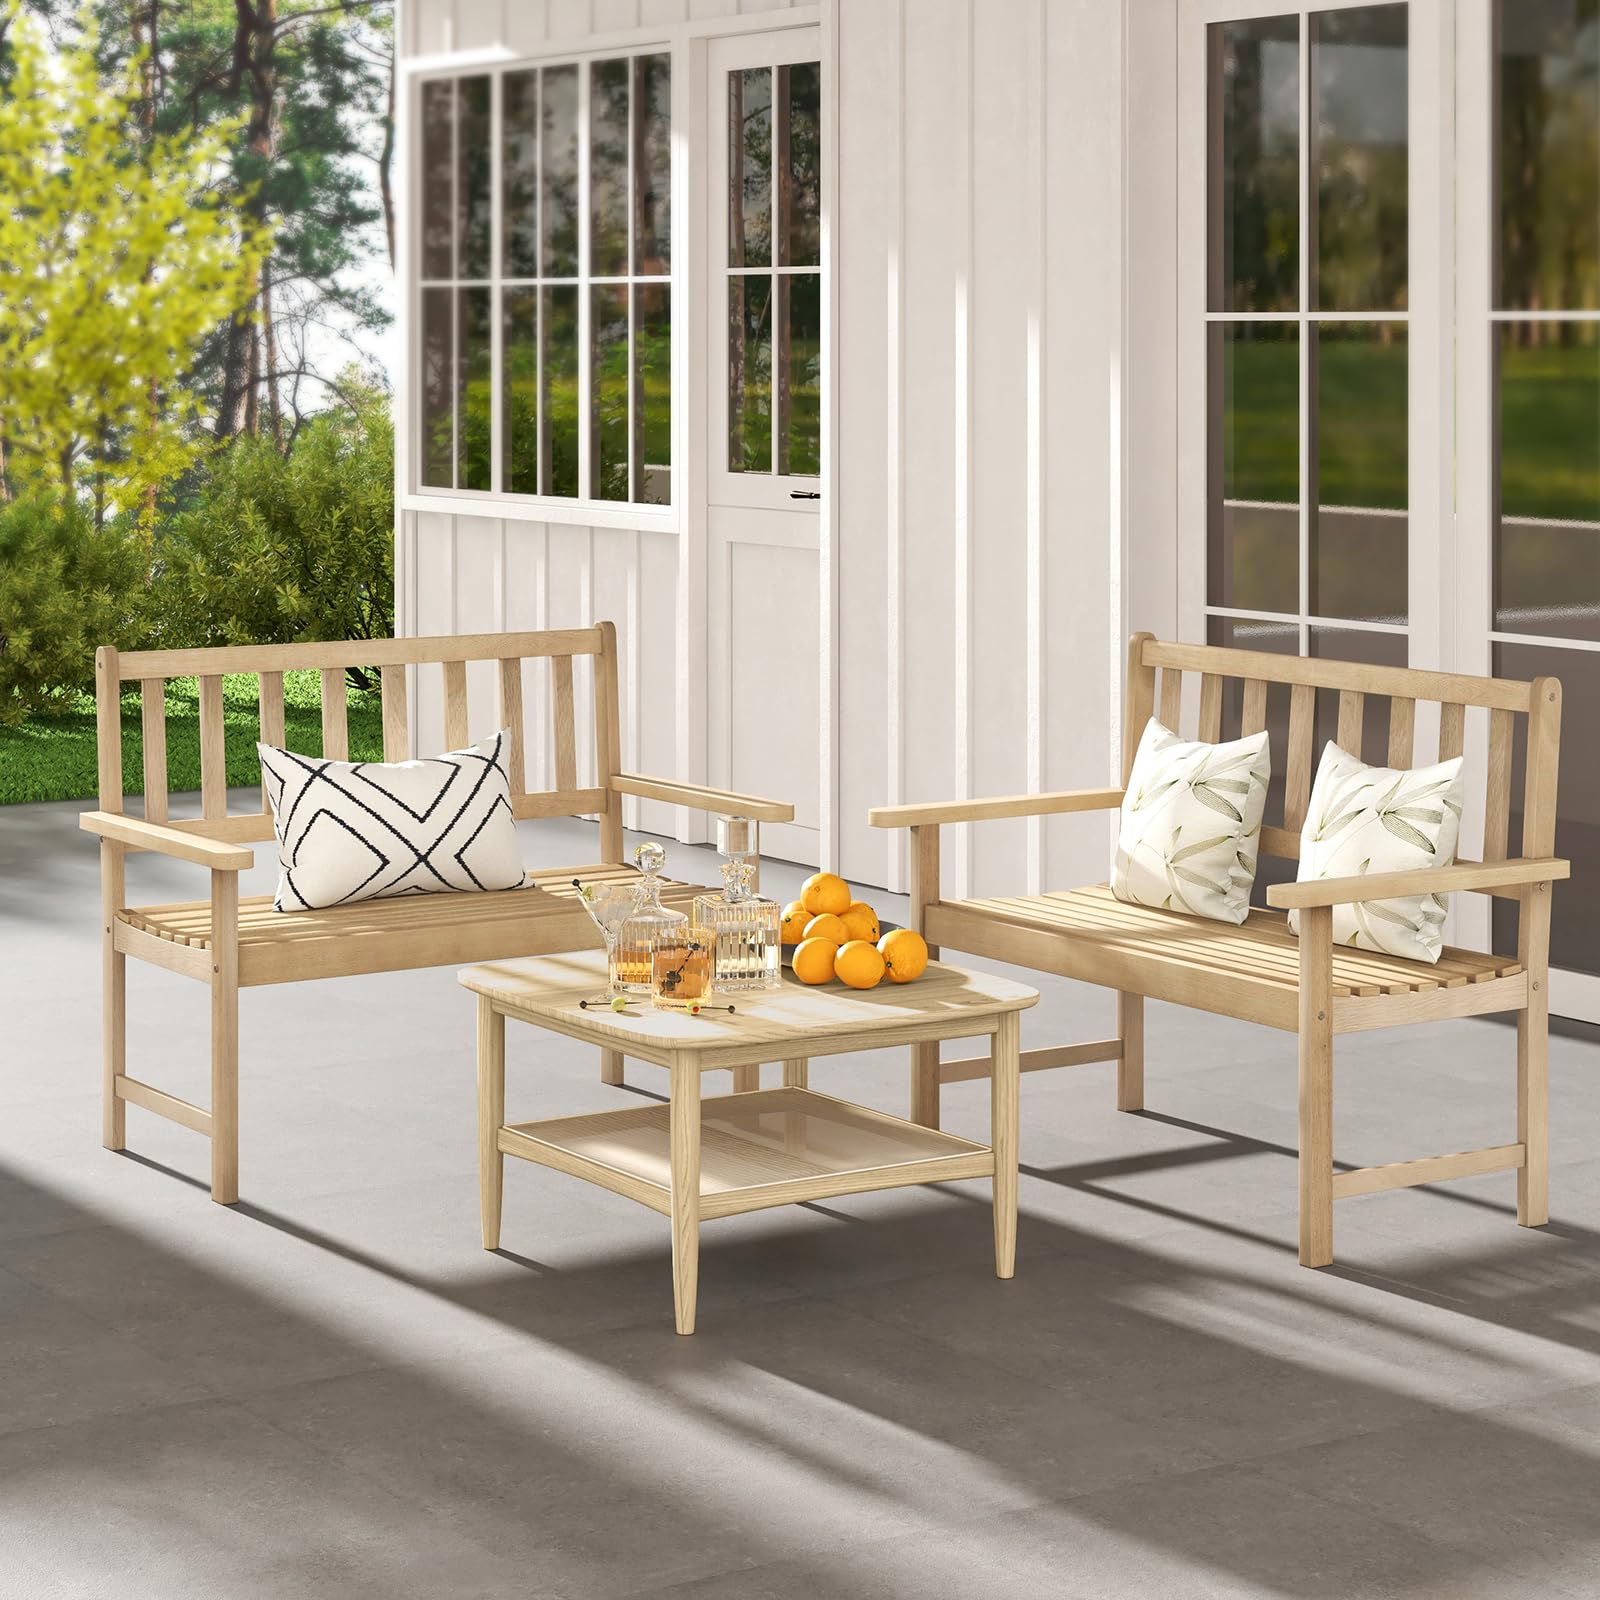 Eco-Friendly Patio Conversation Sets: Why You Should Make the Switch